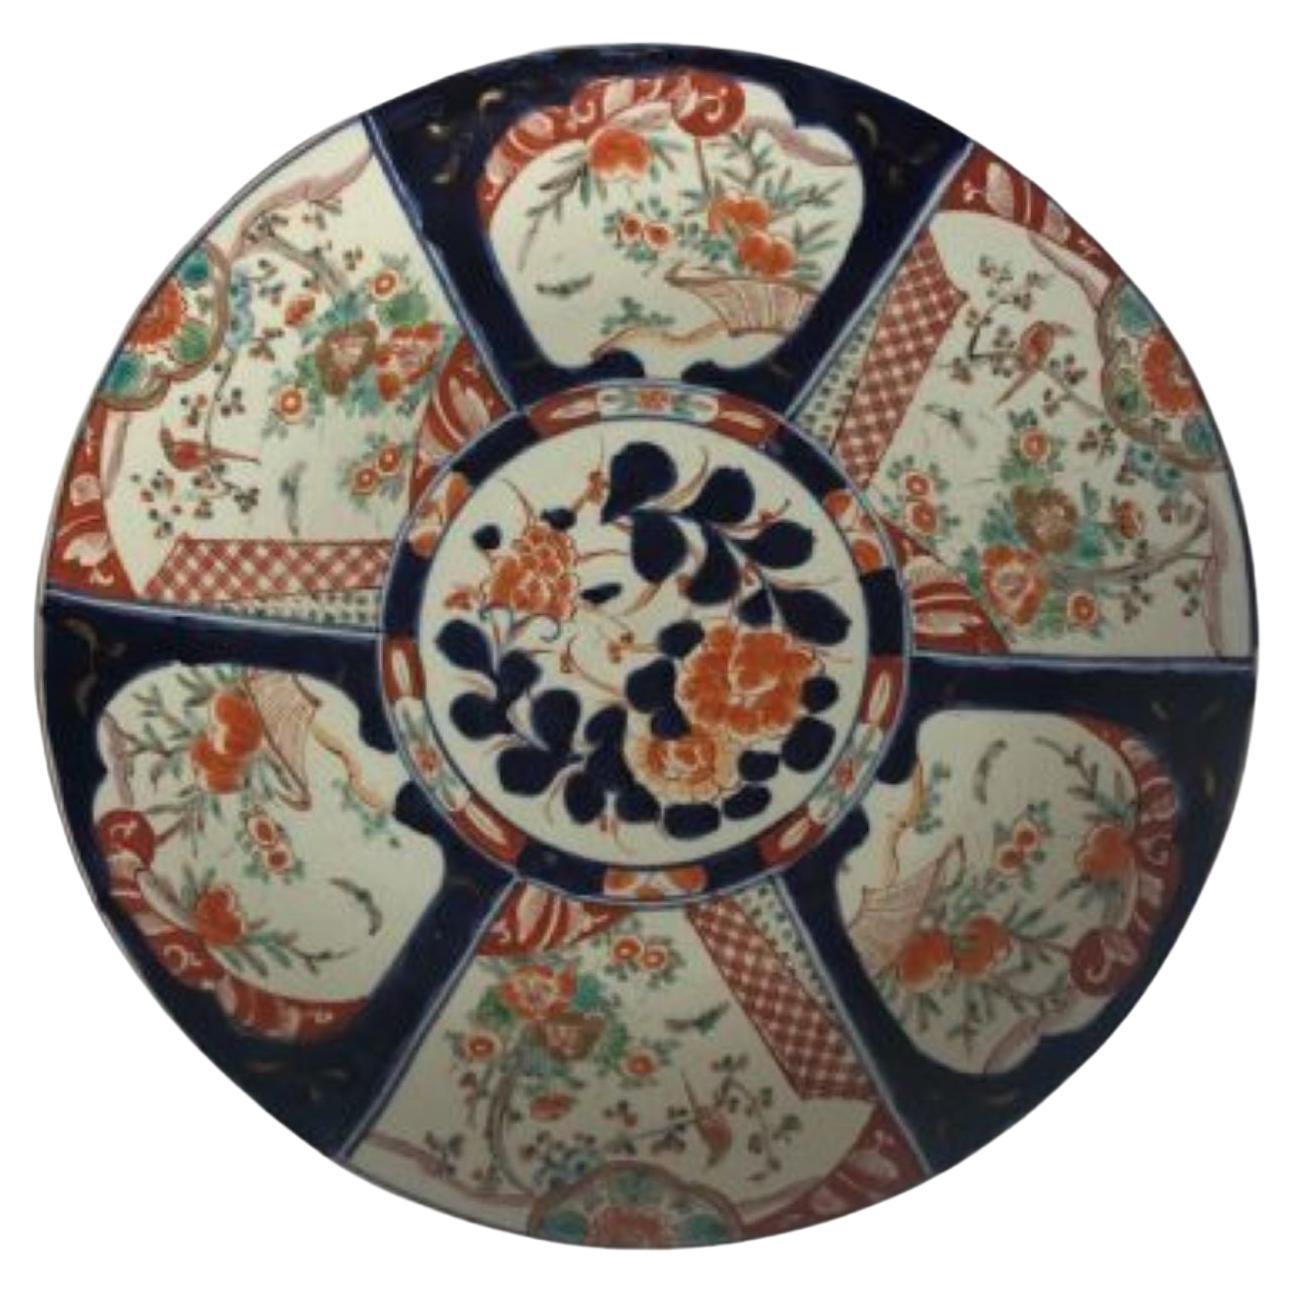 Large quality antique Japanese Imari hand painted plate